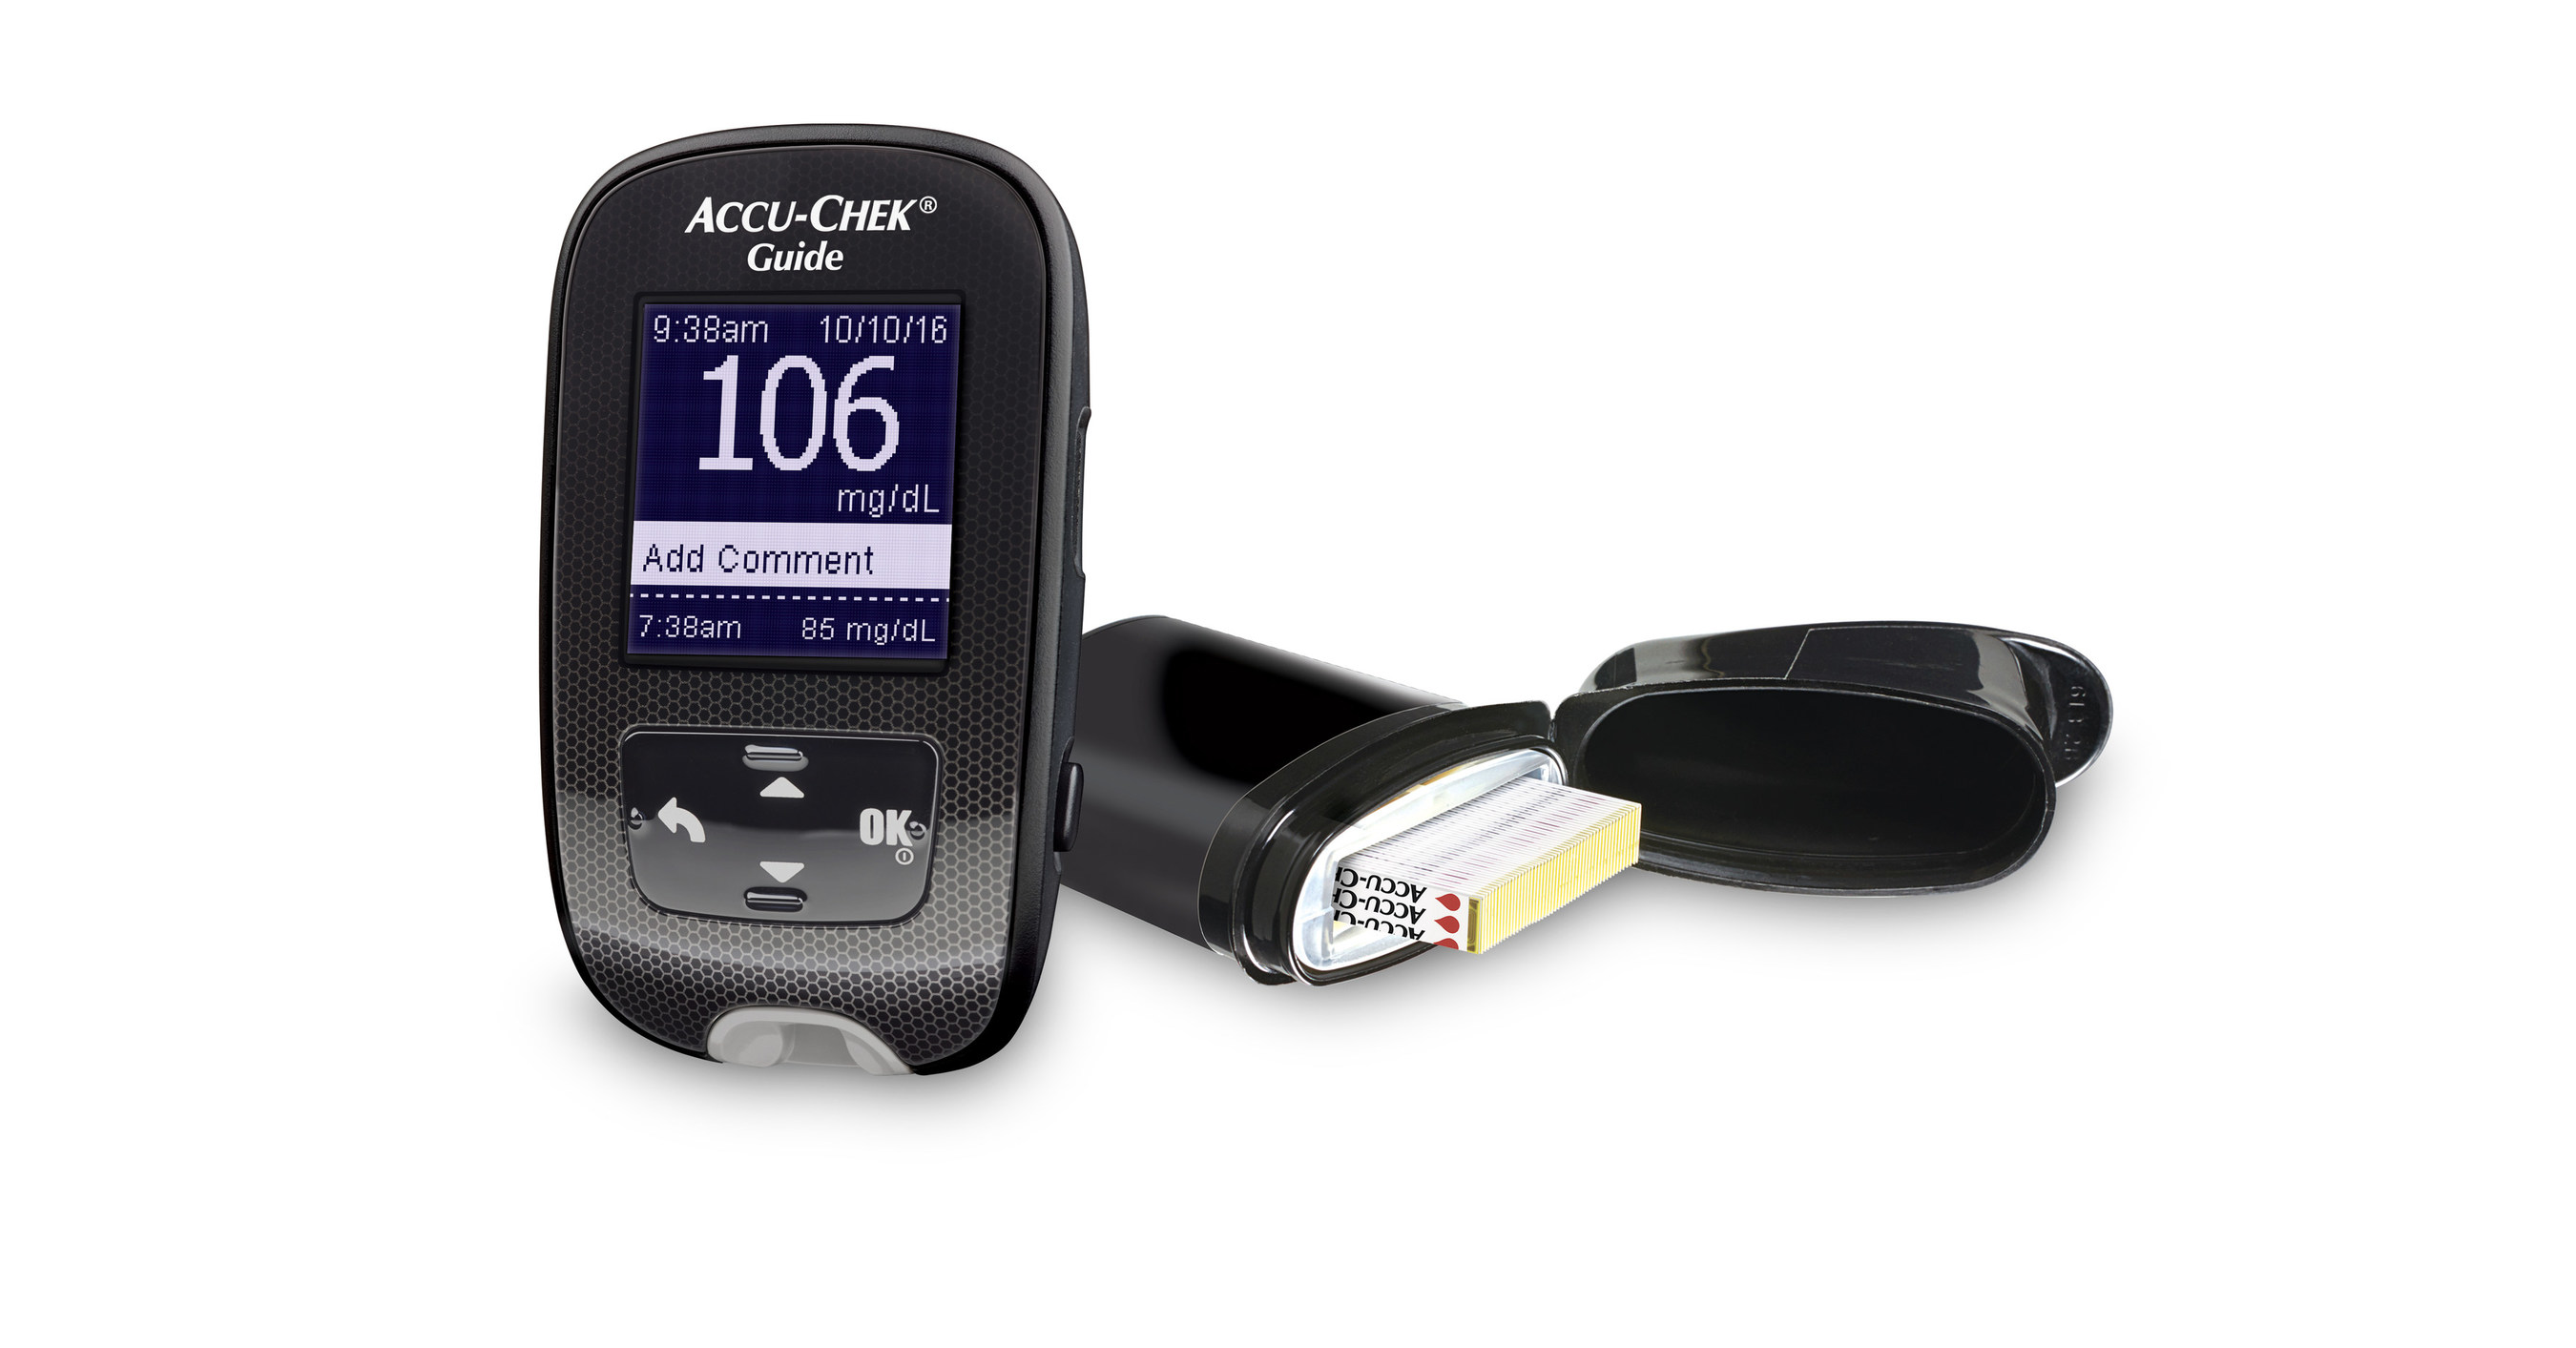 Roche Diabetes Care Introduces Blood Glucose Meter and Savings Program